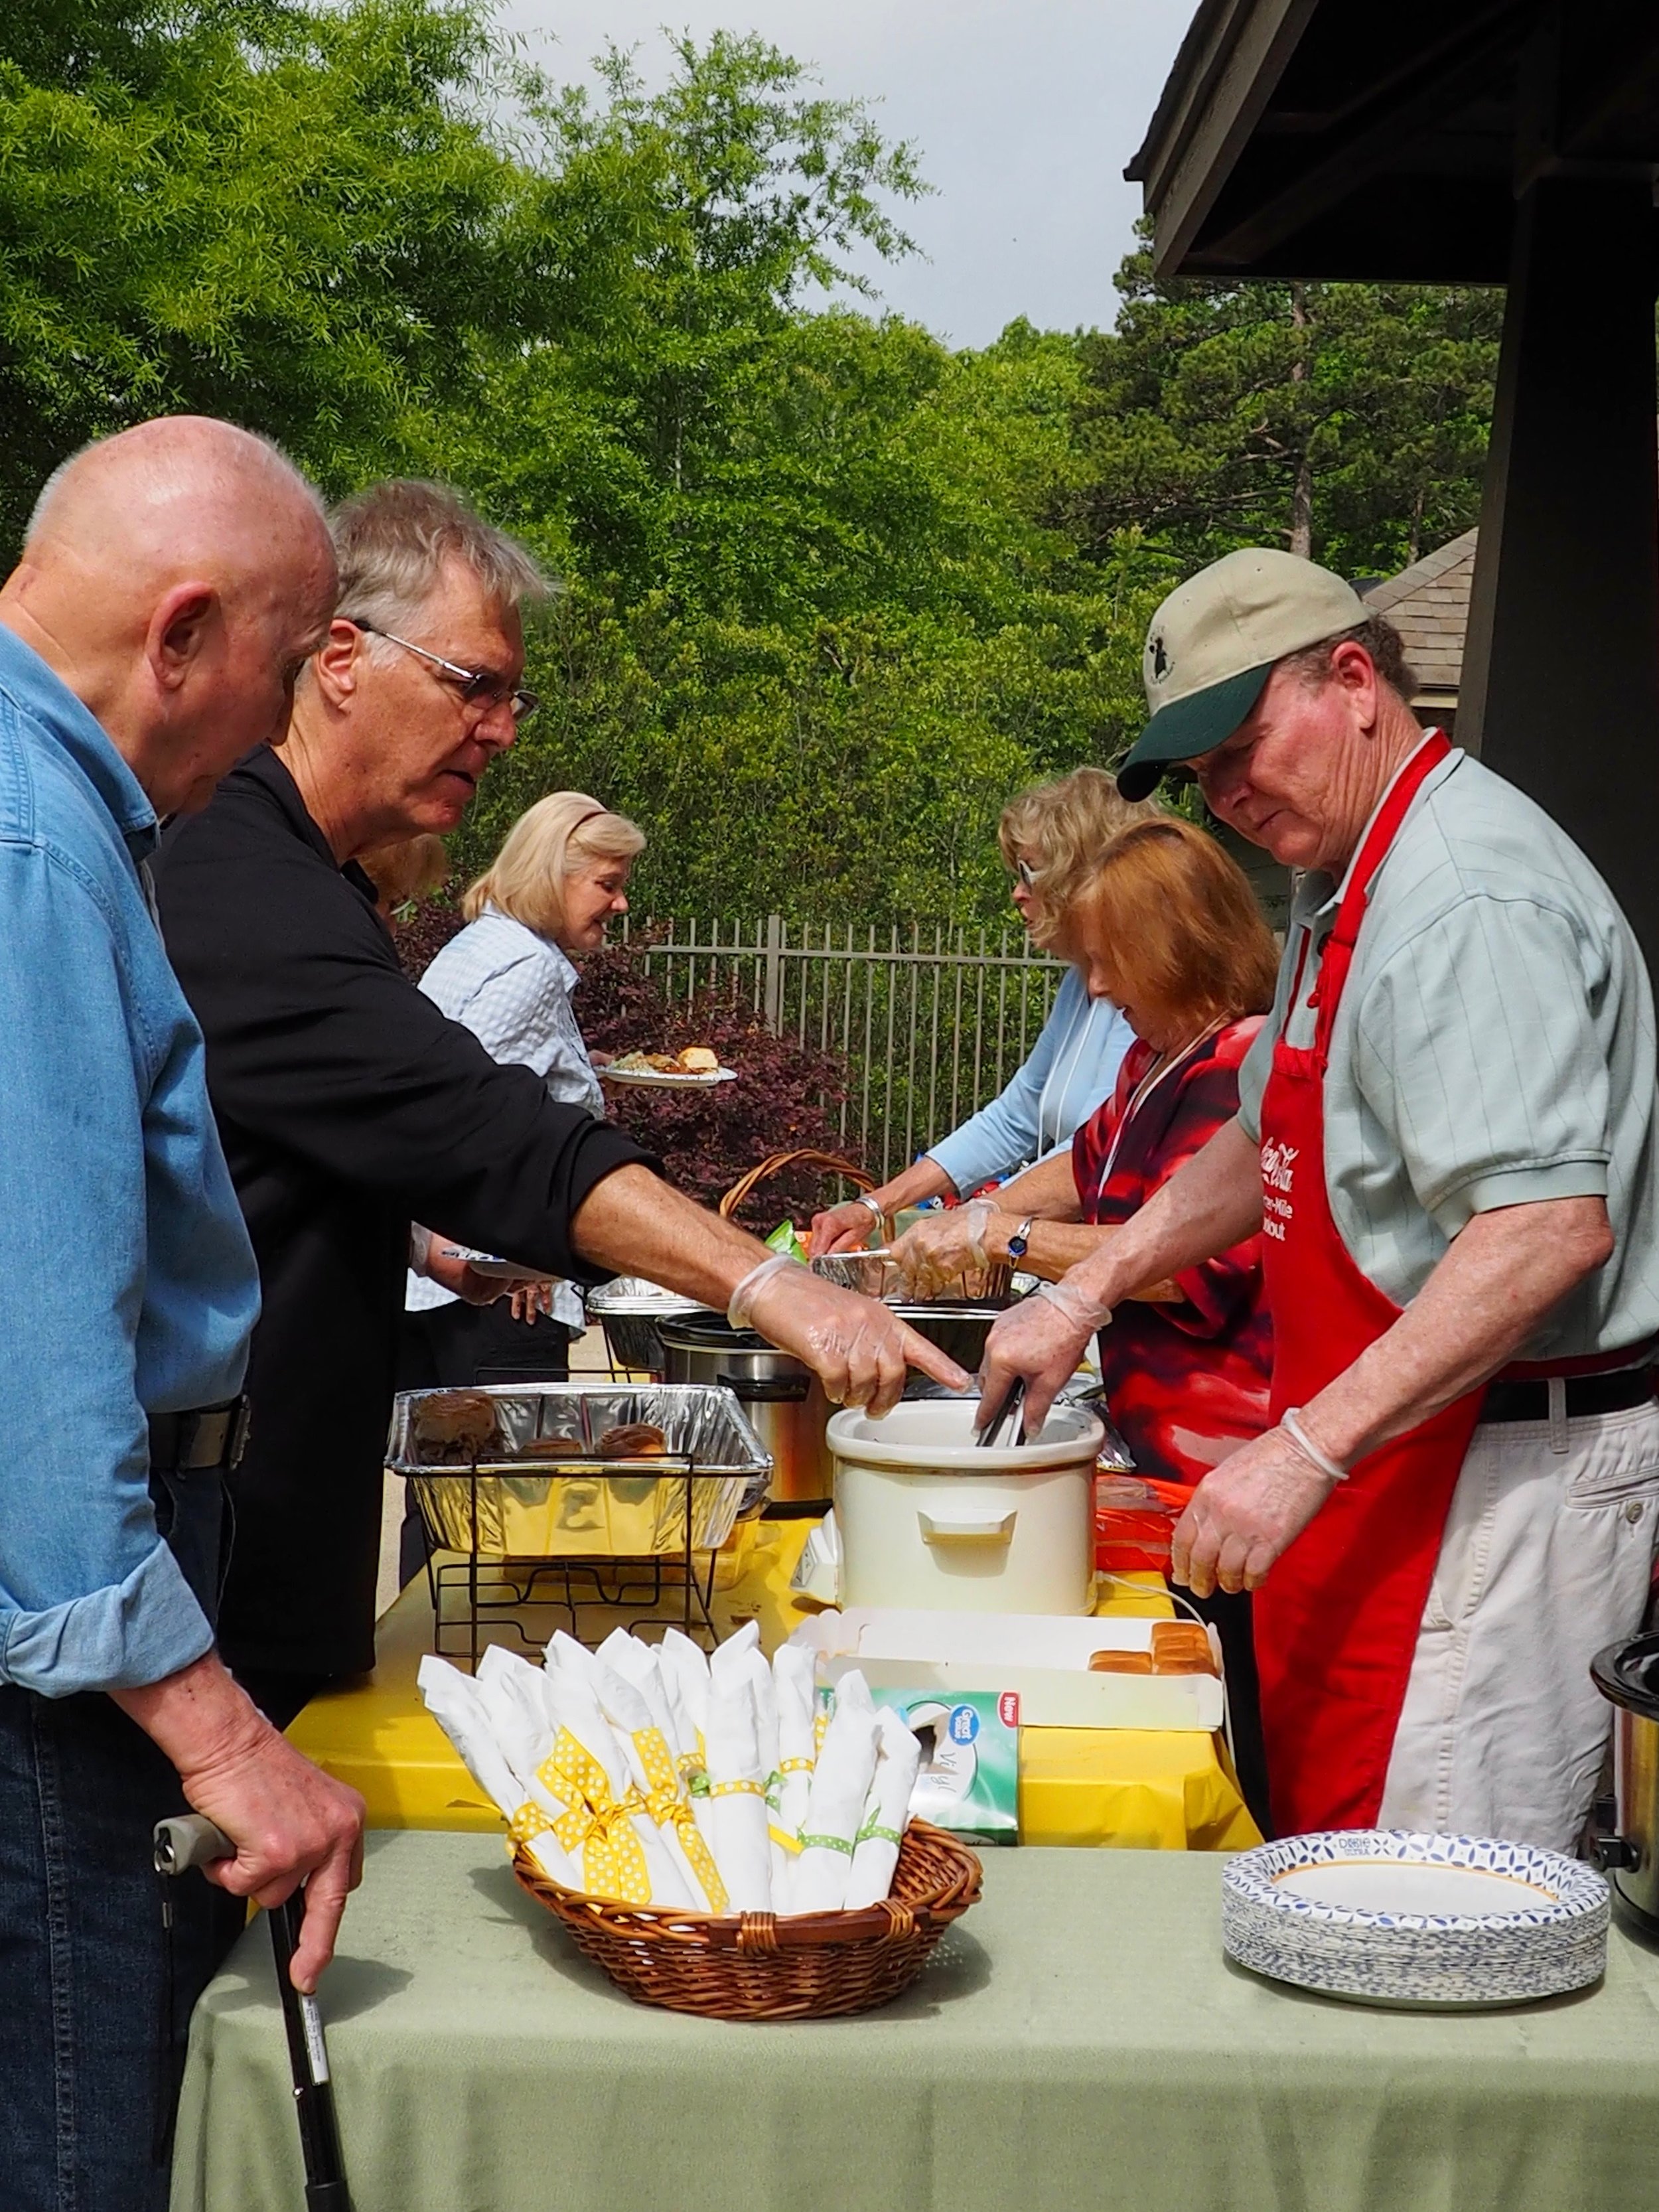  Time for the annual WFB picnic, with great food prepared by generous volunteer members. 